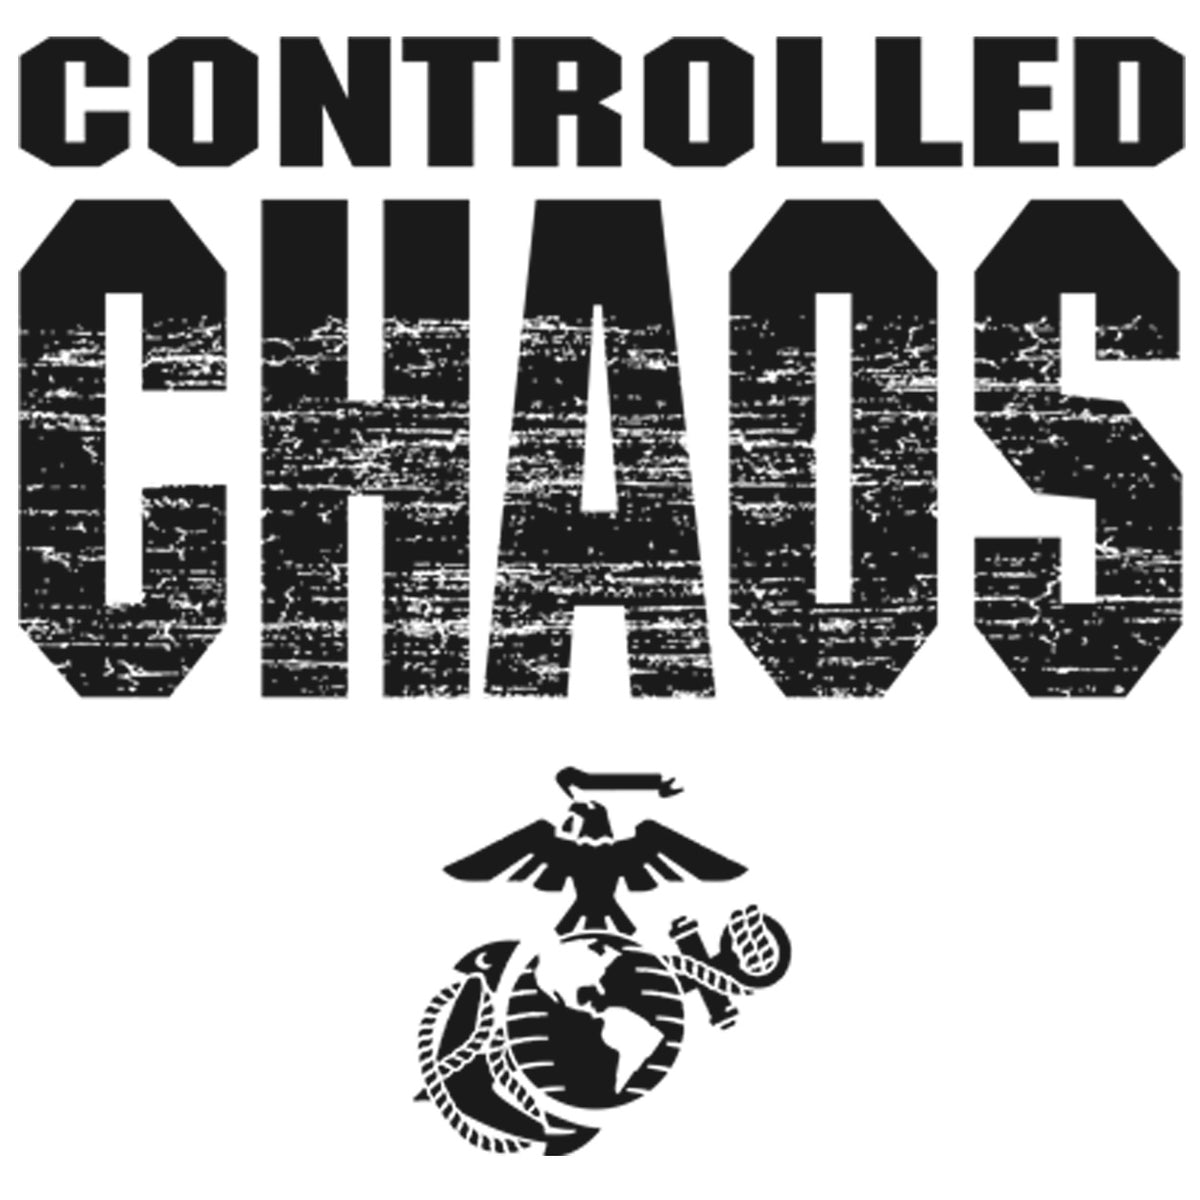 Controlled Chaos Performance Long Sleeve Tee